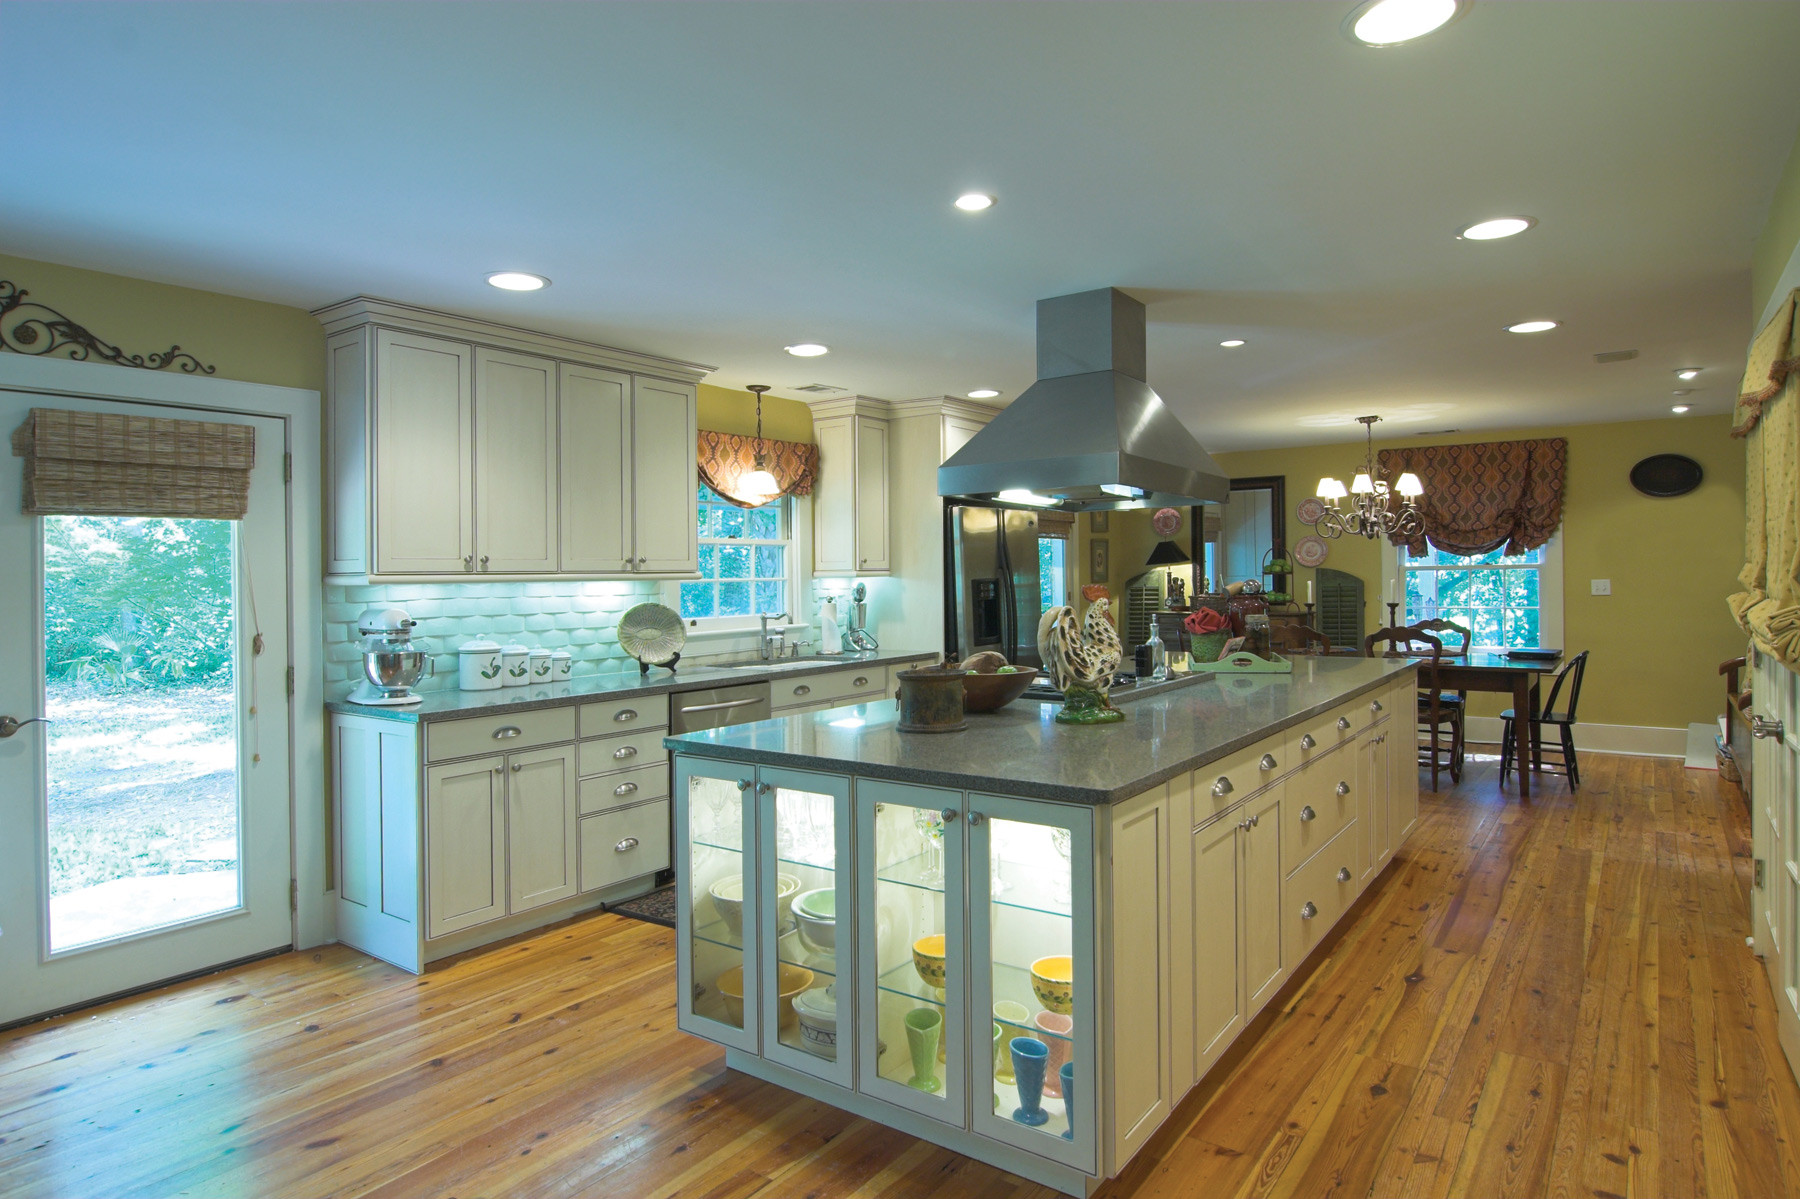 Kitchen Cabinet Light
 Using Under Cabinet and Task Lighting For Function and